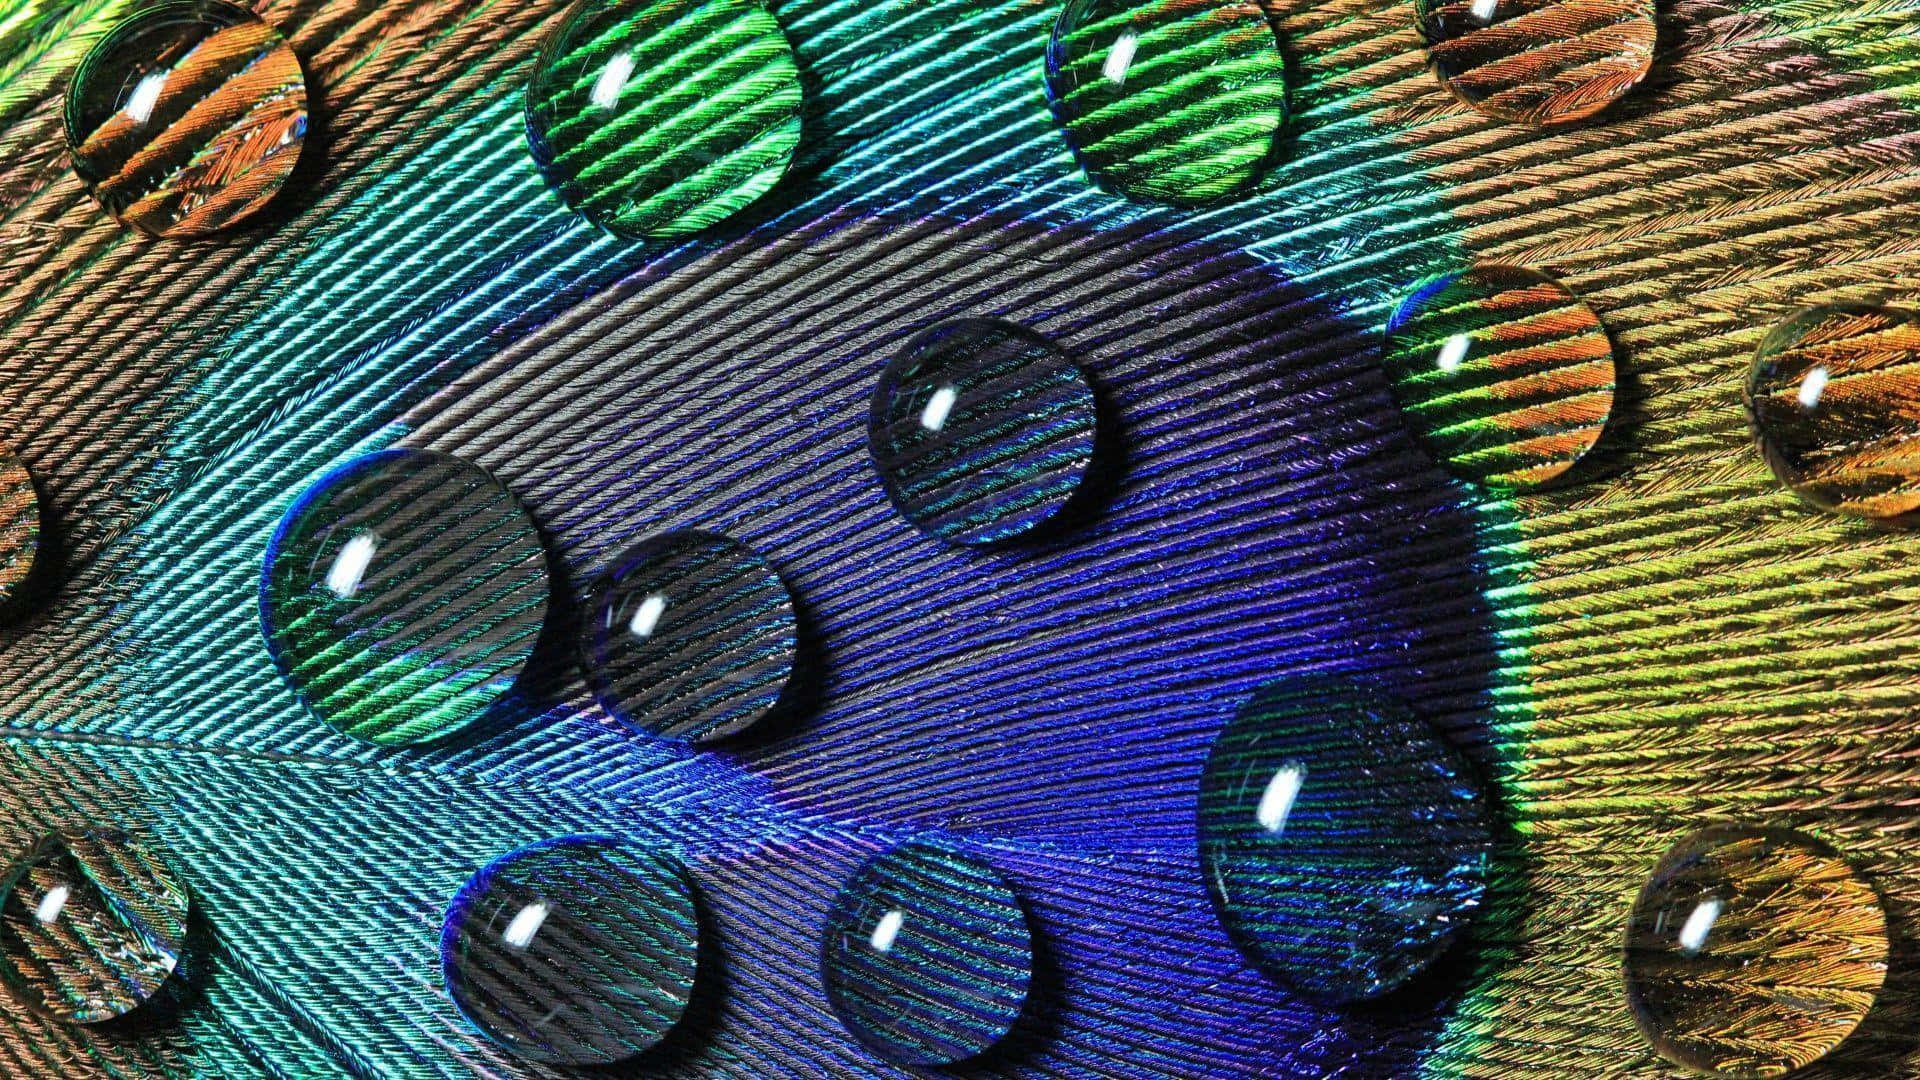 Peacock feather showing its vibrant colors